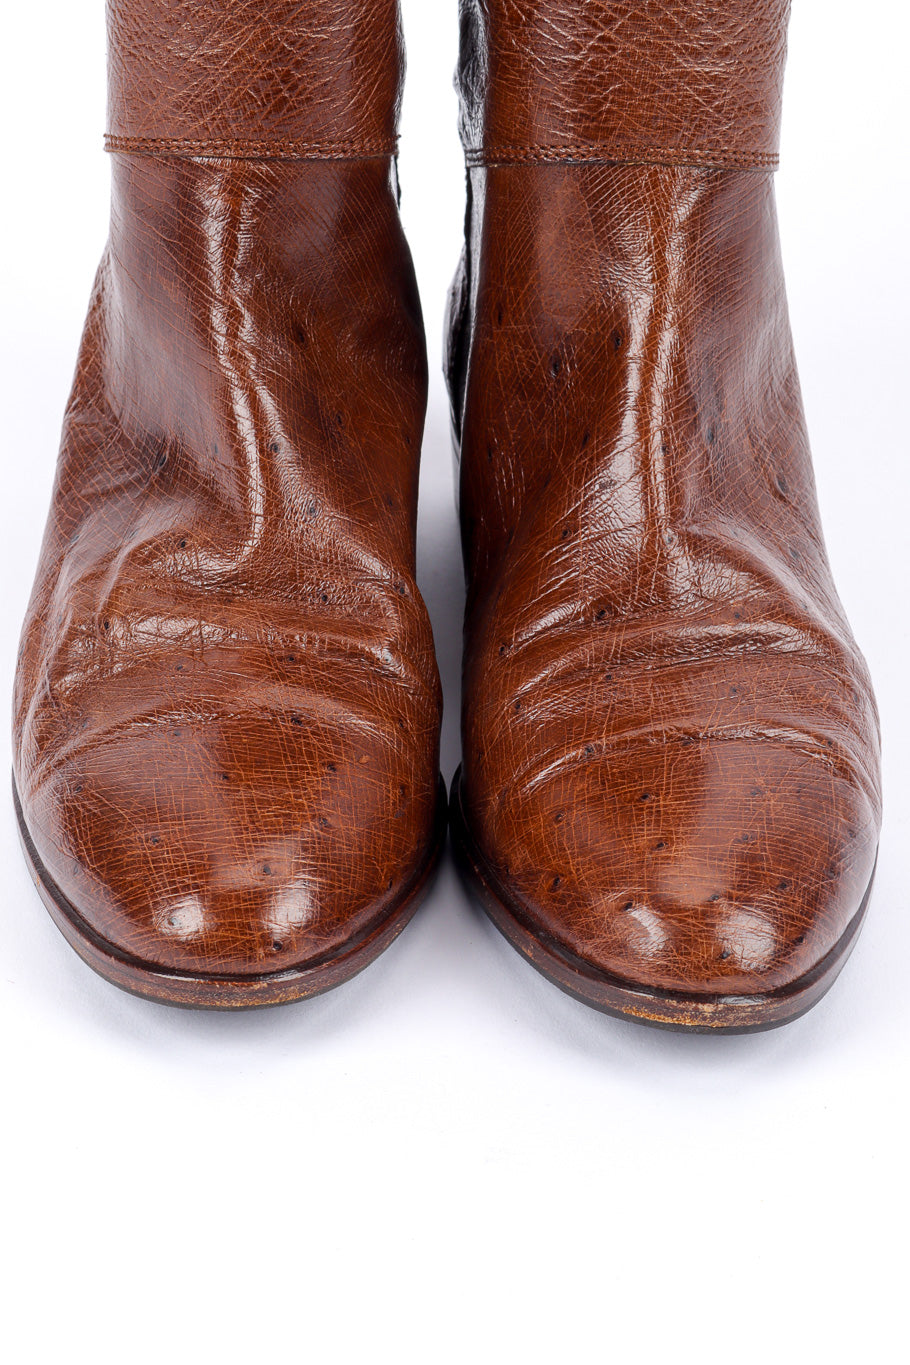 Vintage Gucci Brown Ostrich Leather Riding Boot toe creasing closeup @recessla